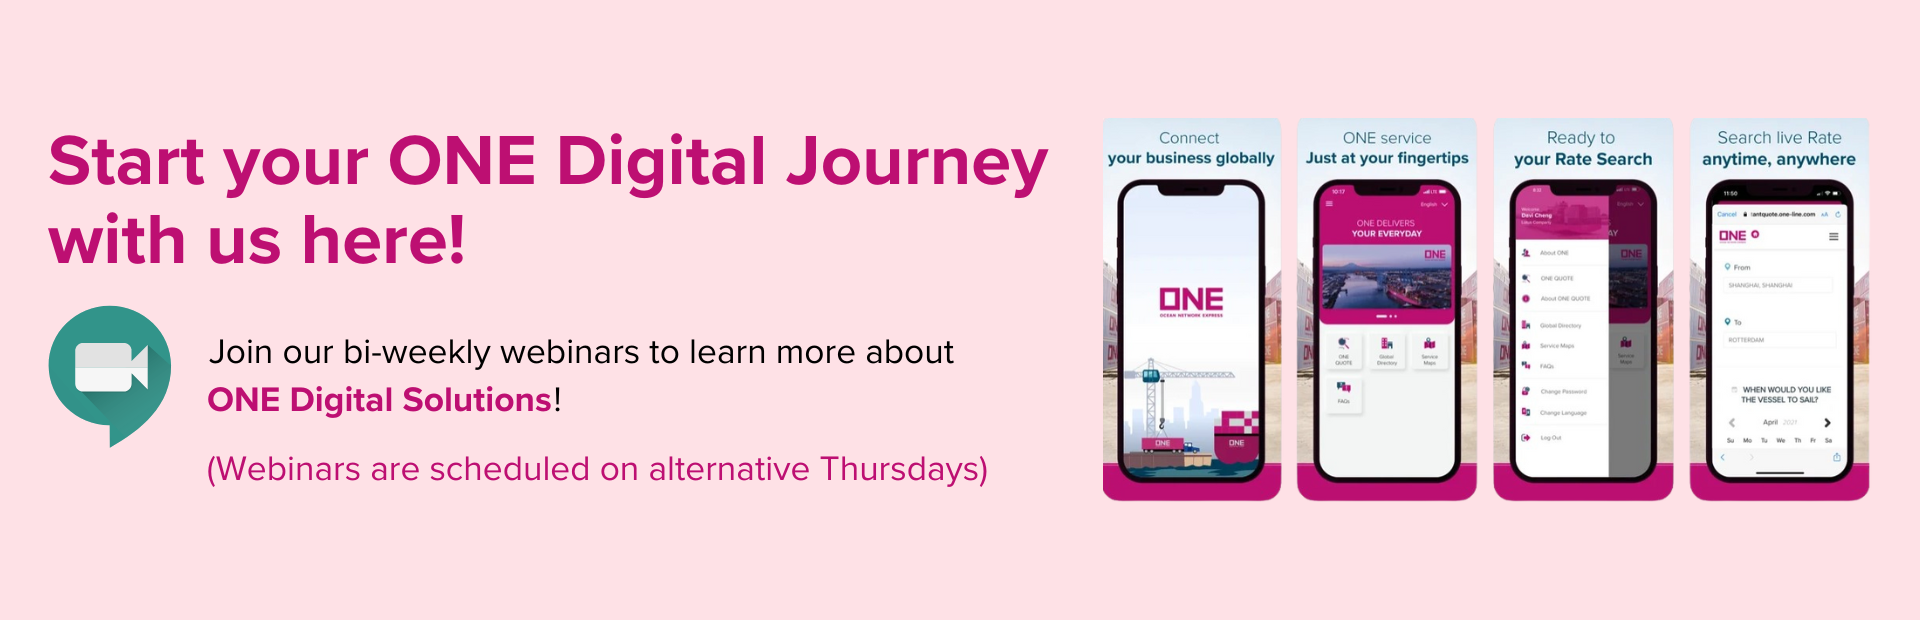 Start your ONE Digital Journey with us here